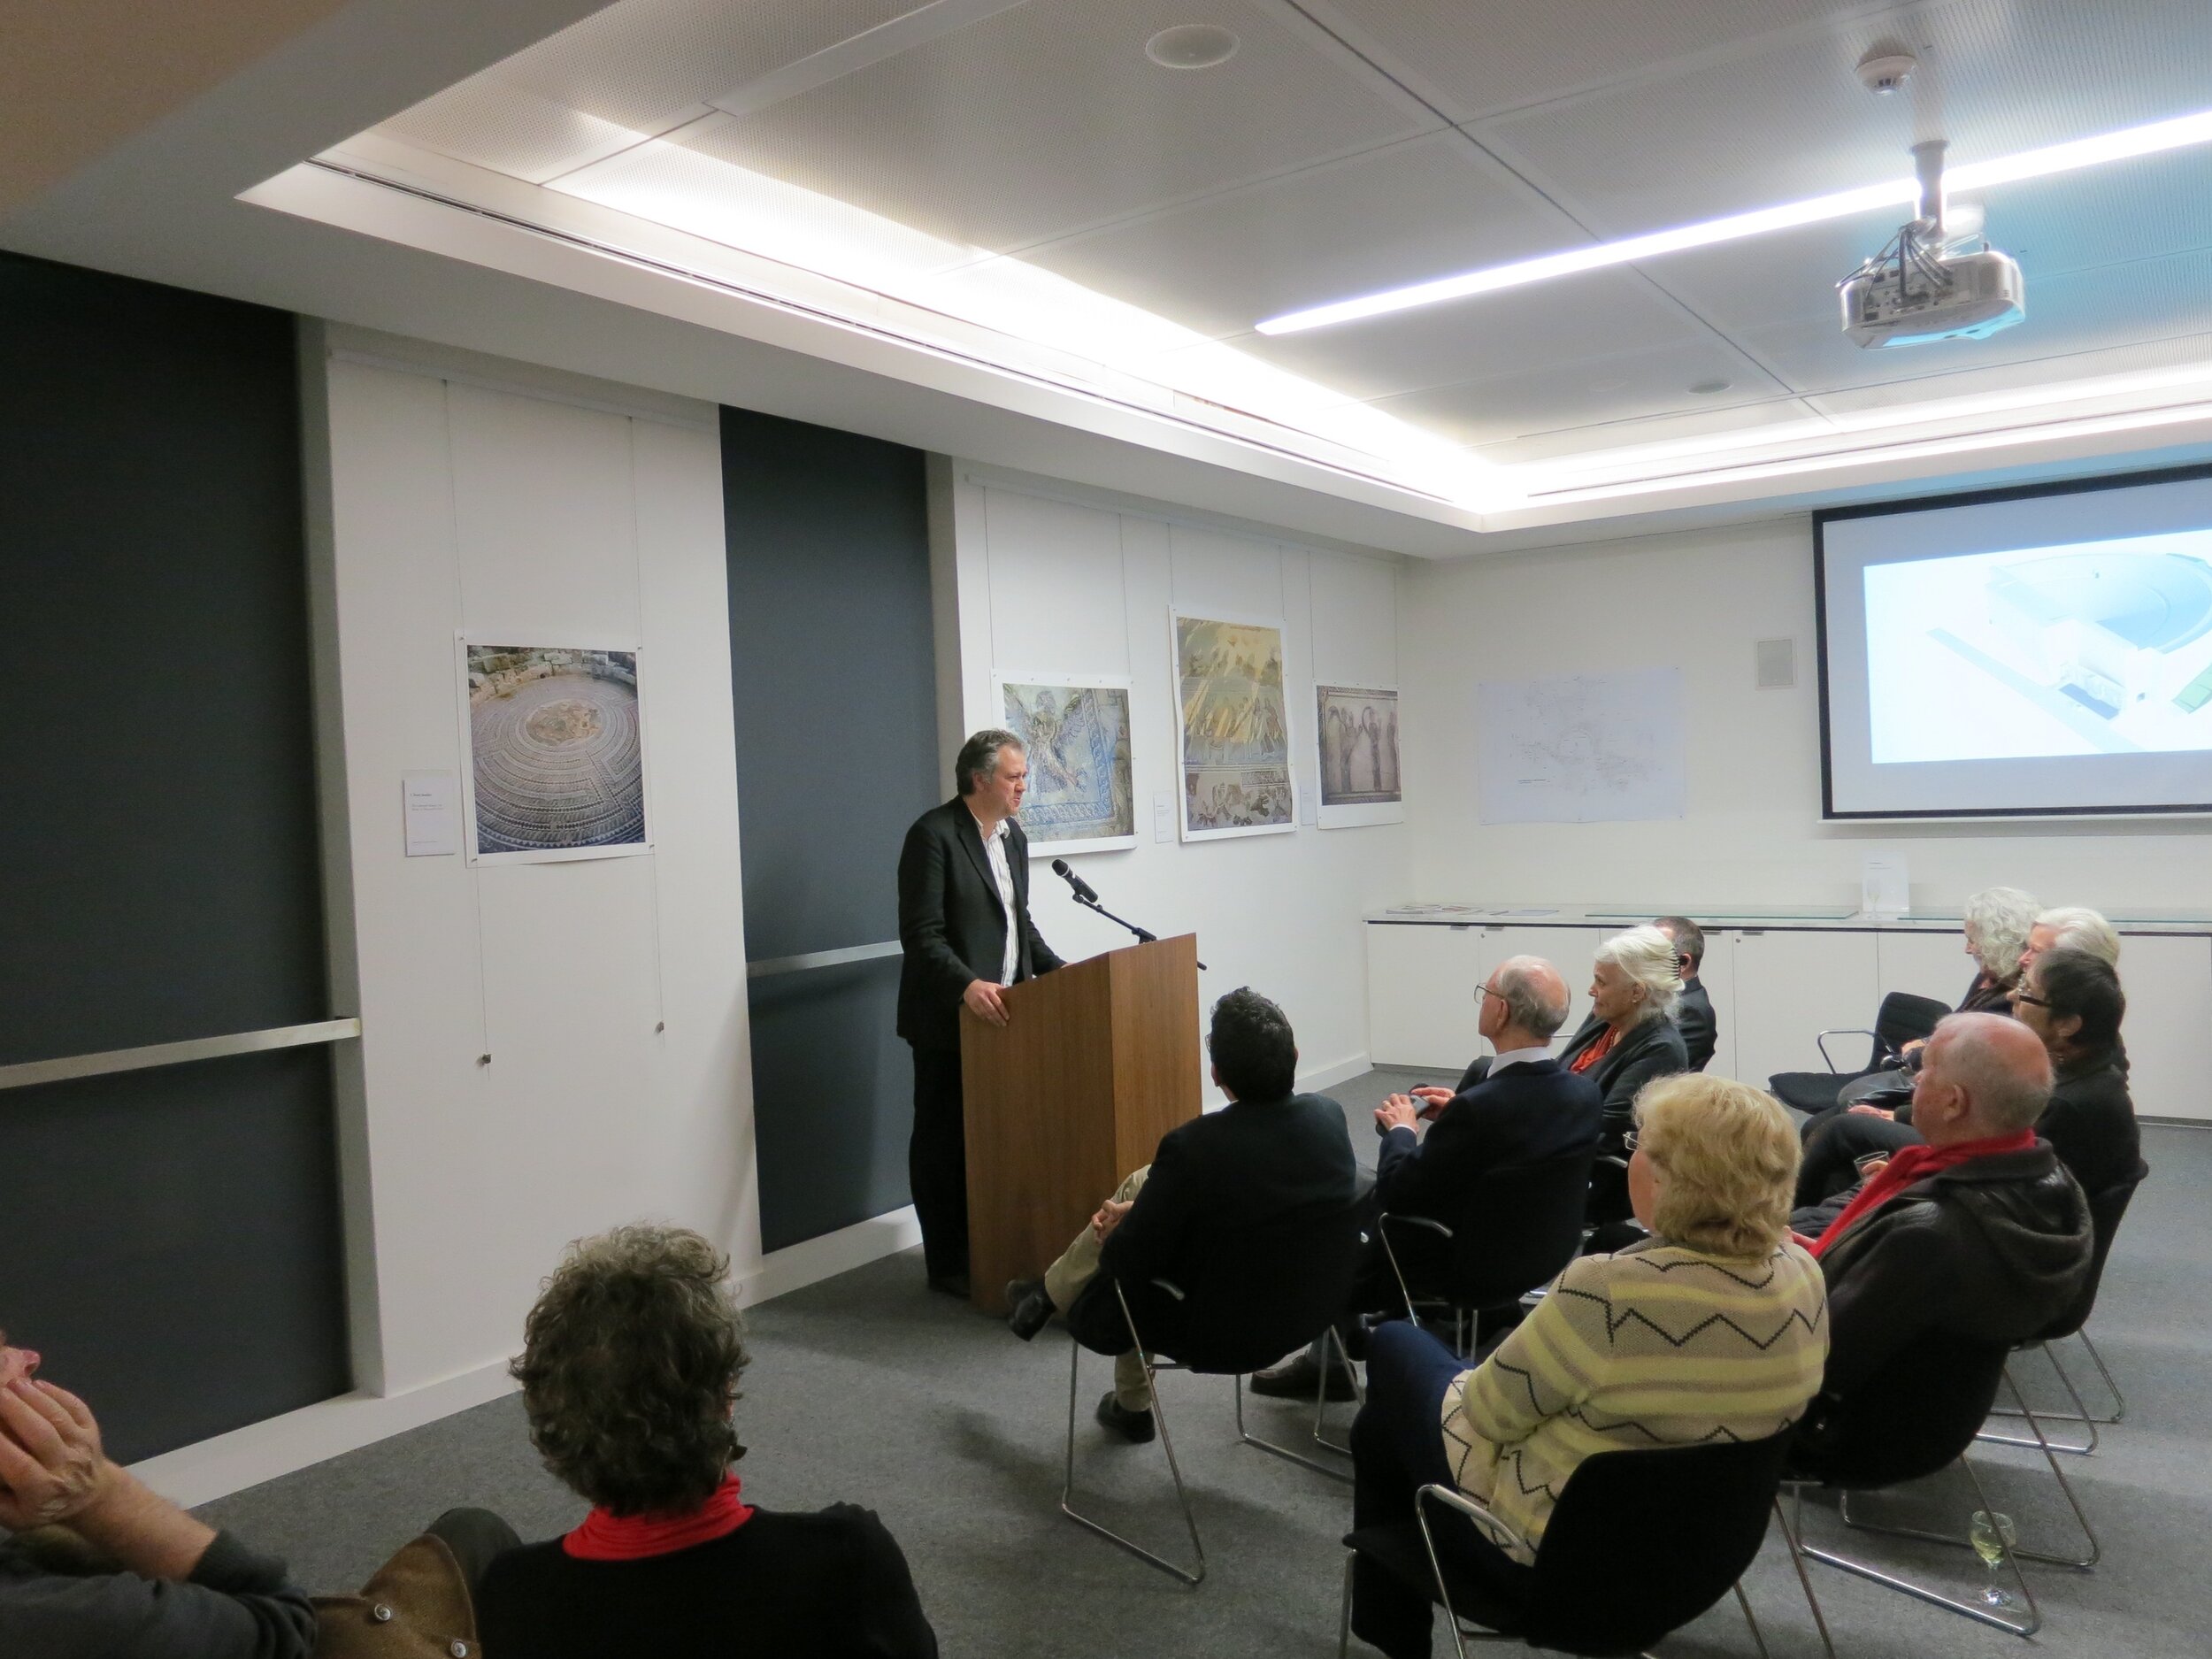  Dr. Craig Barker speaking at the opening of  Response to Cyprus,  10 July 2013, hosted by the Australian Archaeological Institute at Athens (AAIA) at the Centre of Classical and Near Eastern Studies of Australia (CCANESA). Works by Derek Kreckler ar